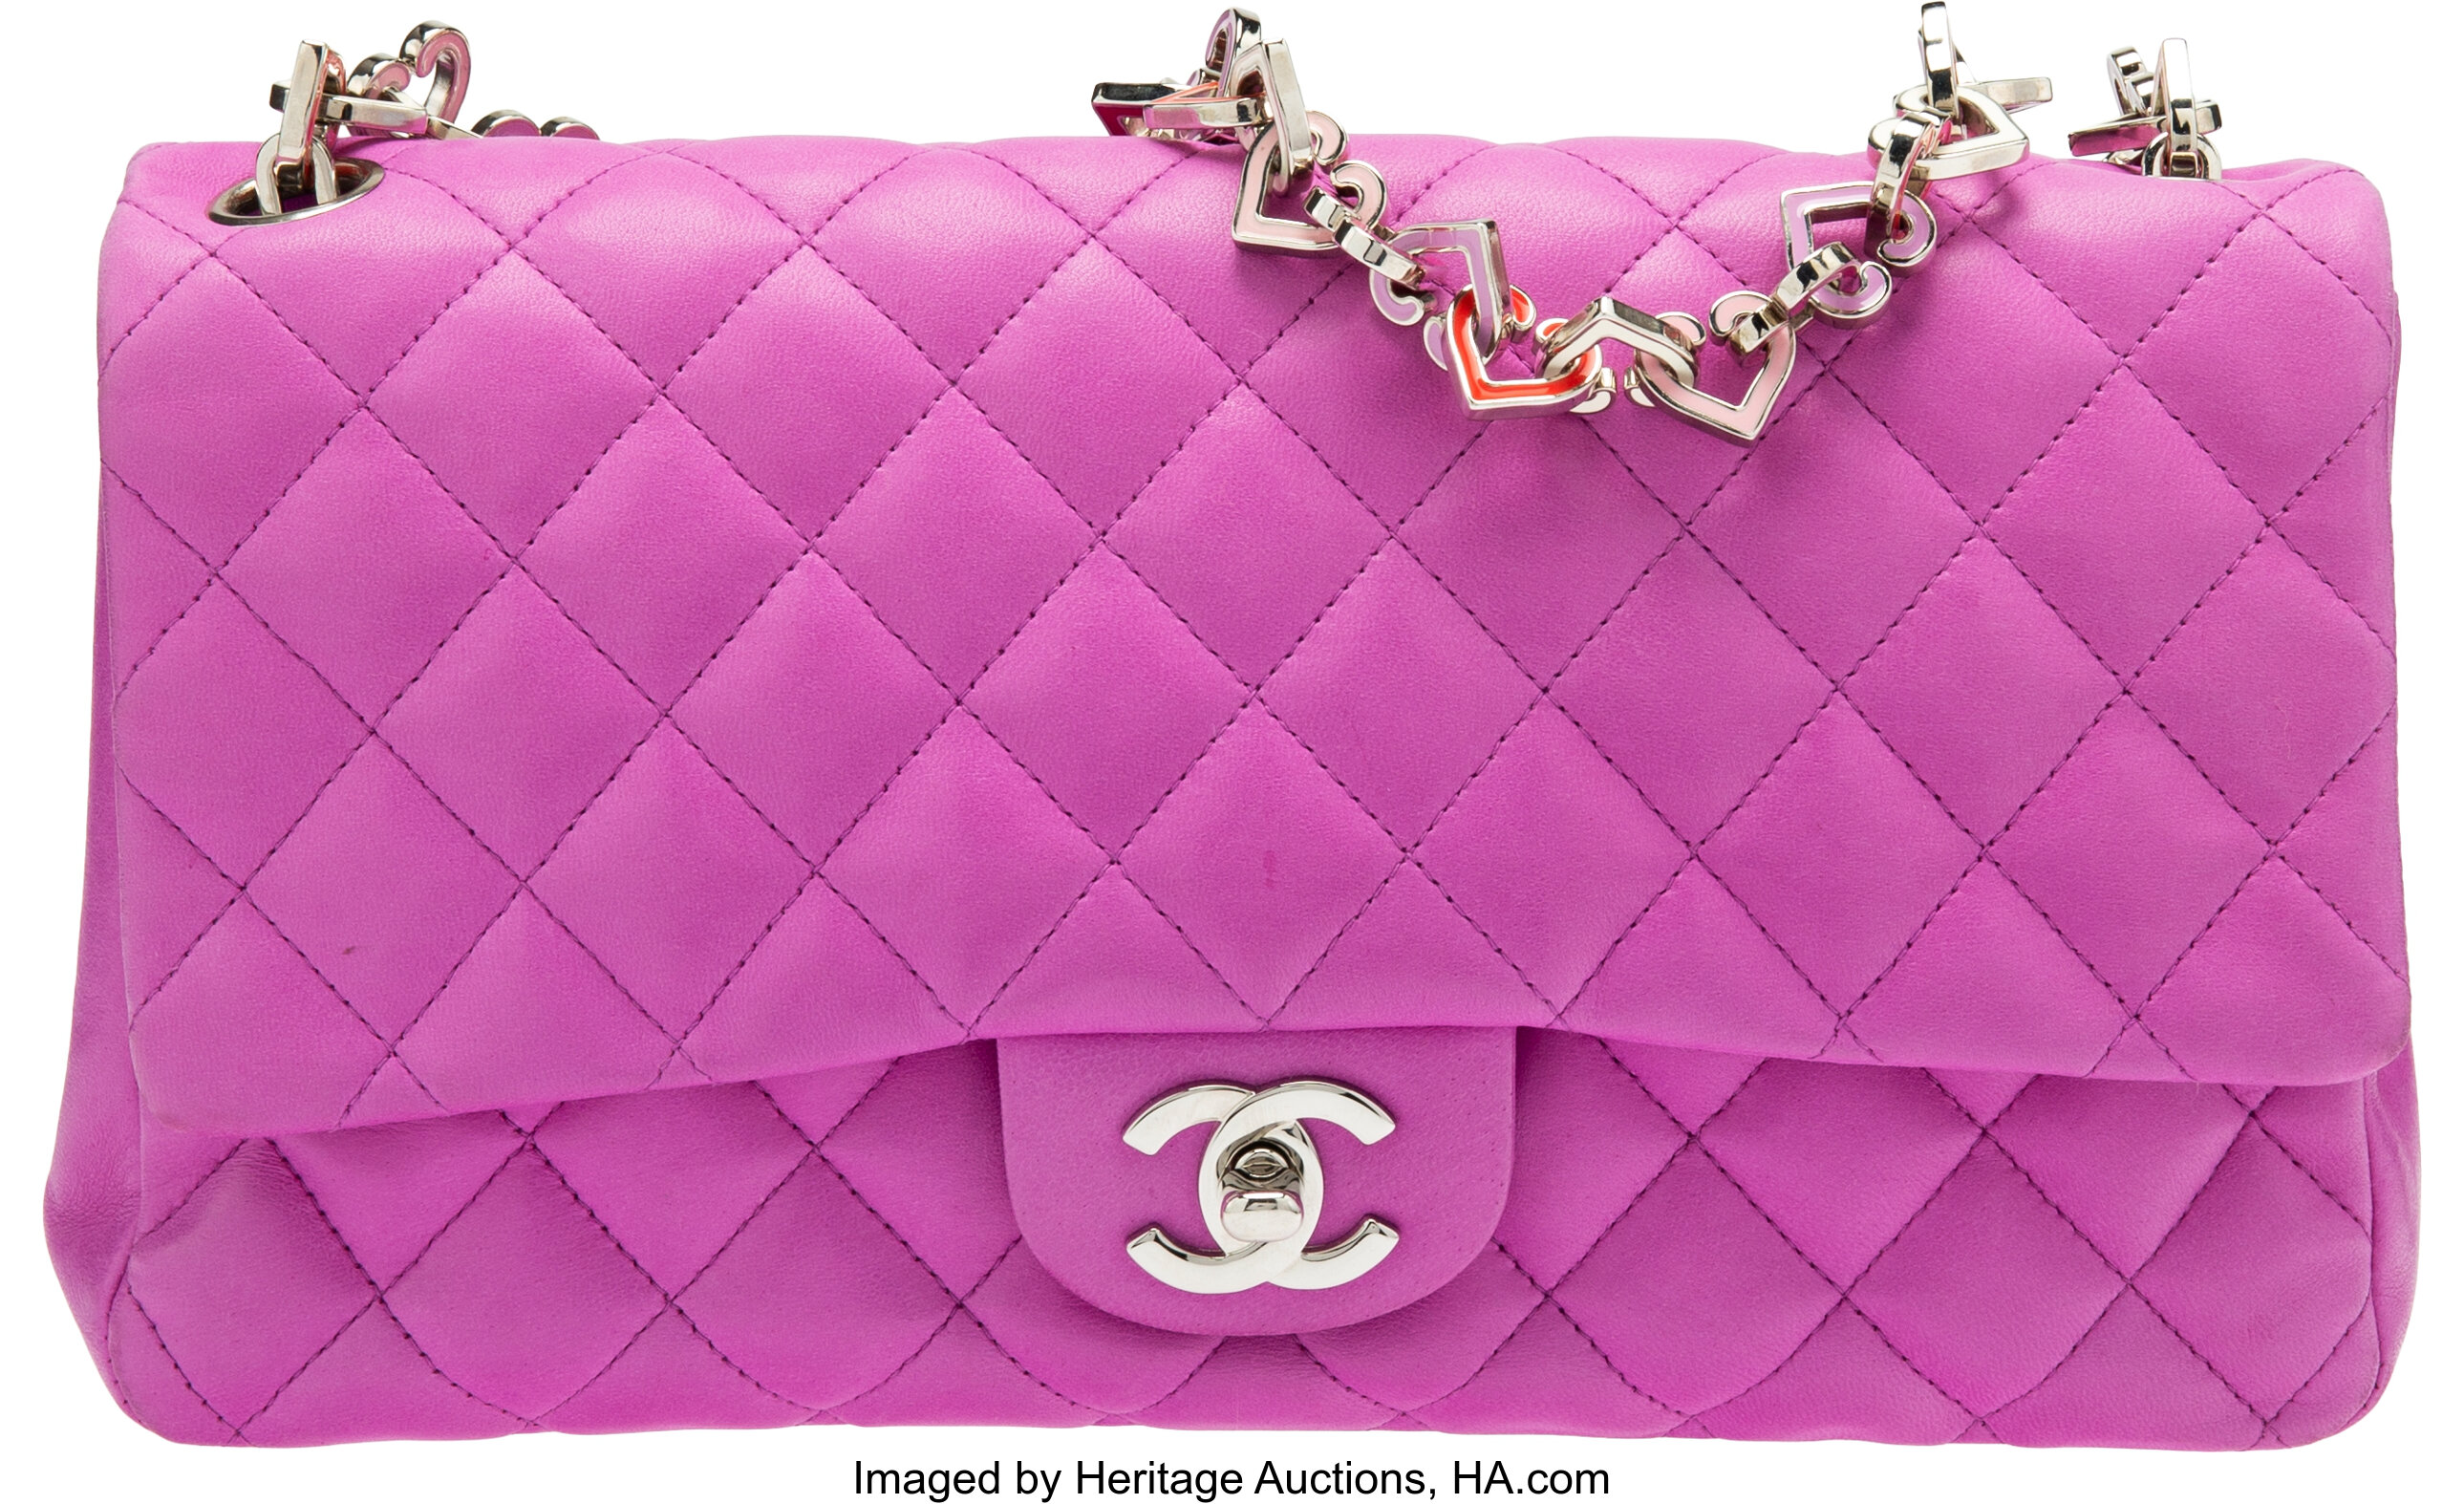 Chanel Limited Edition Purple Quilted Lambskin Leather Medium, Lot #14101